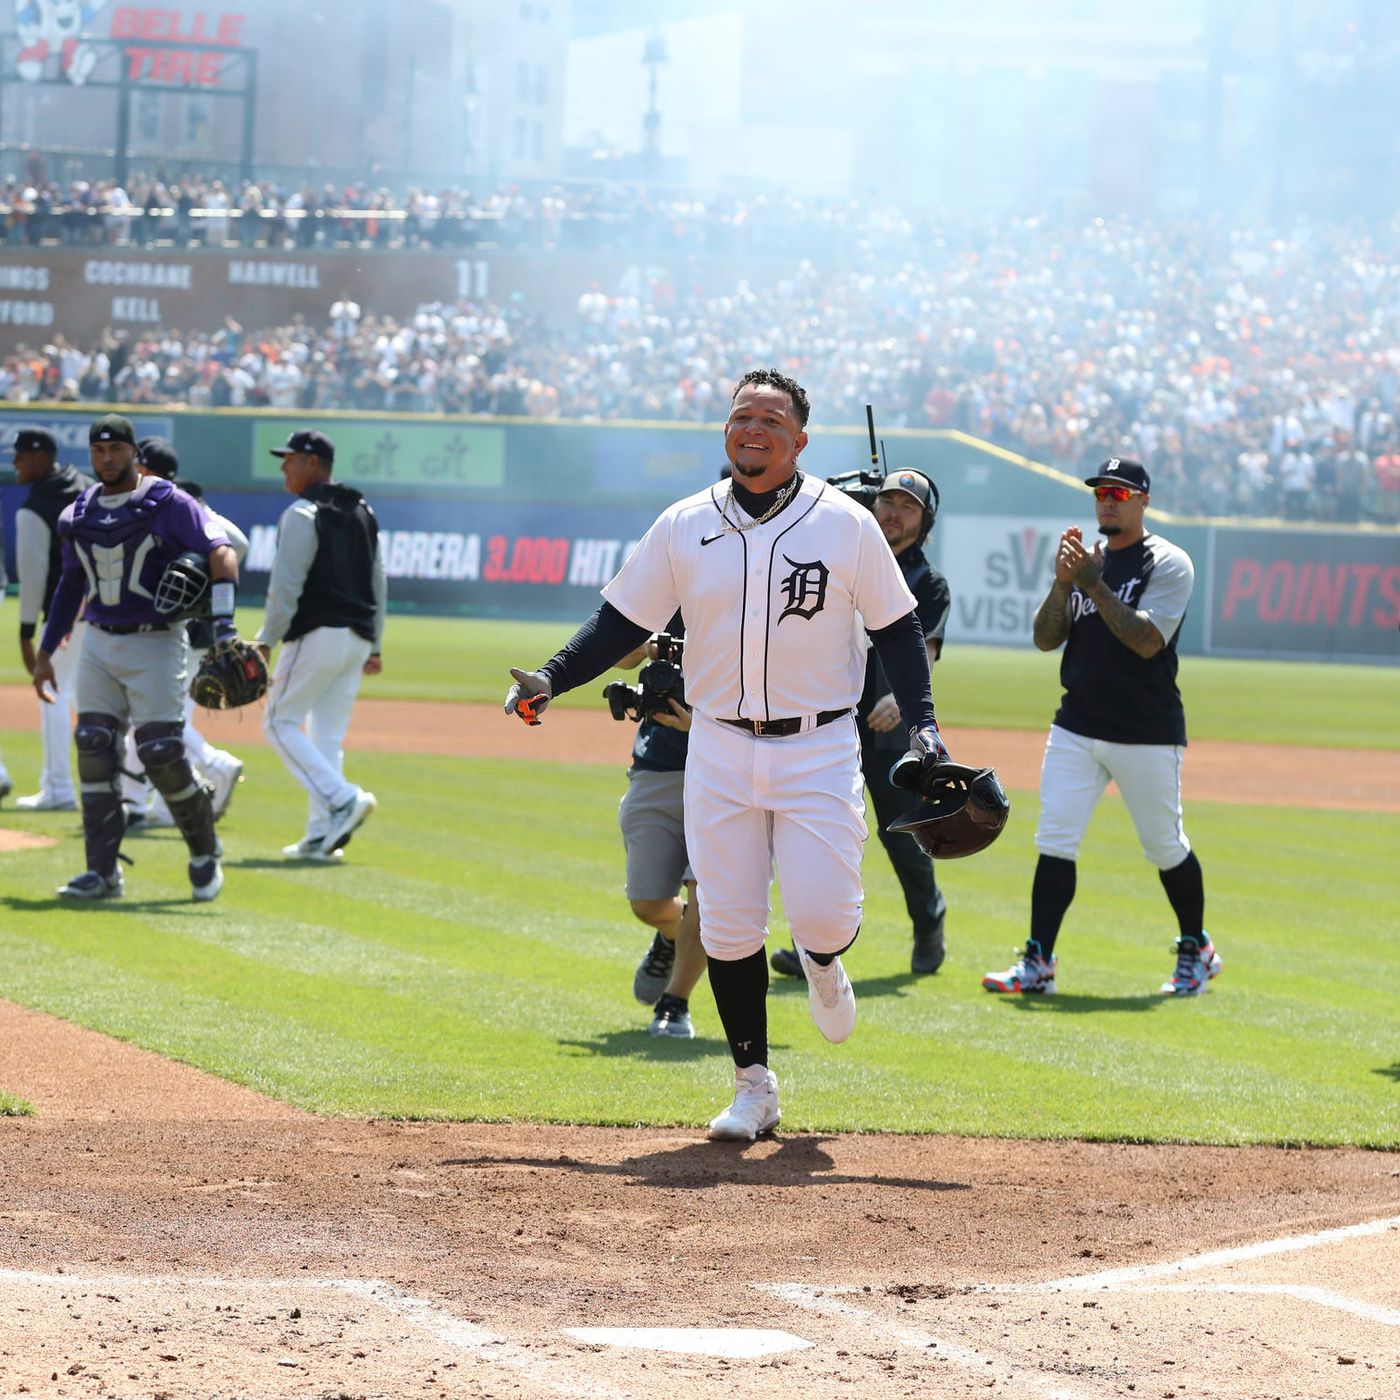 Miguel Cabrera - Triple Crown Winner 2012!!! What a year for Miggy